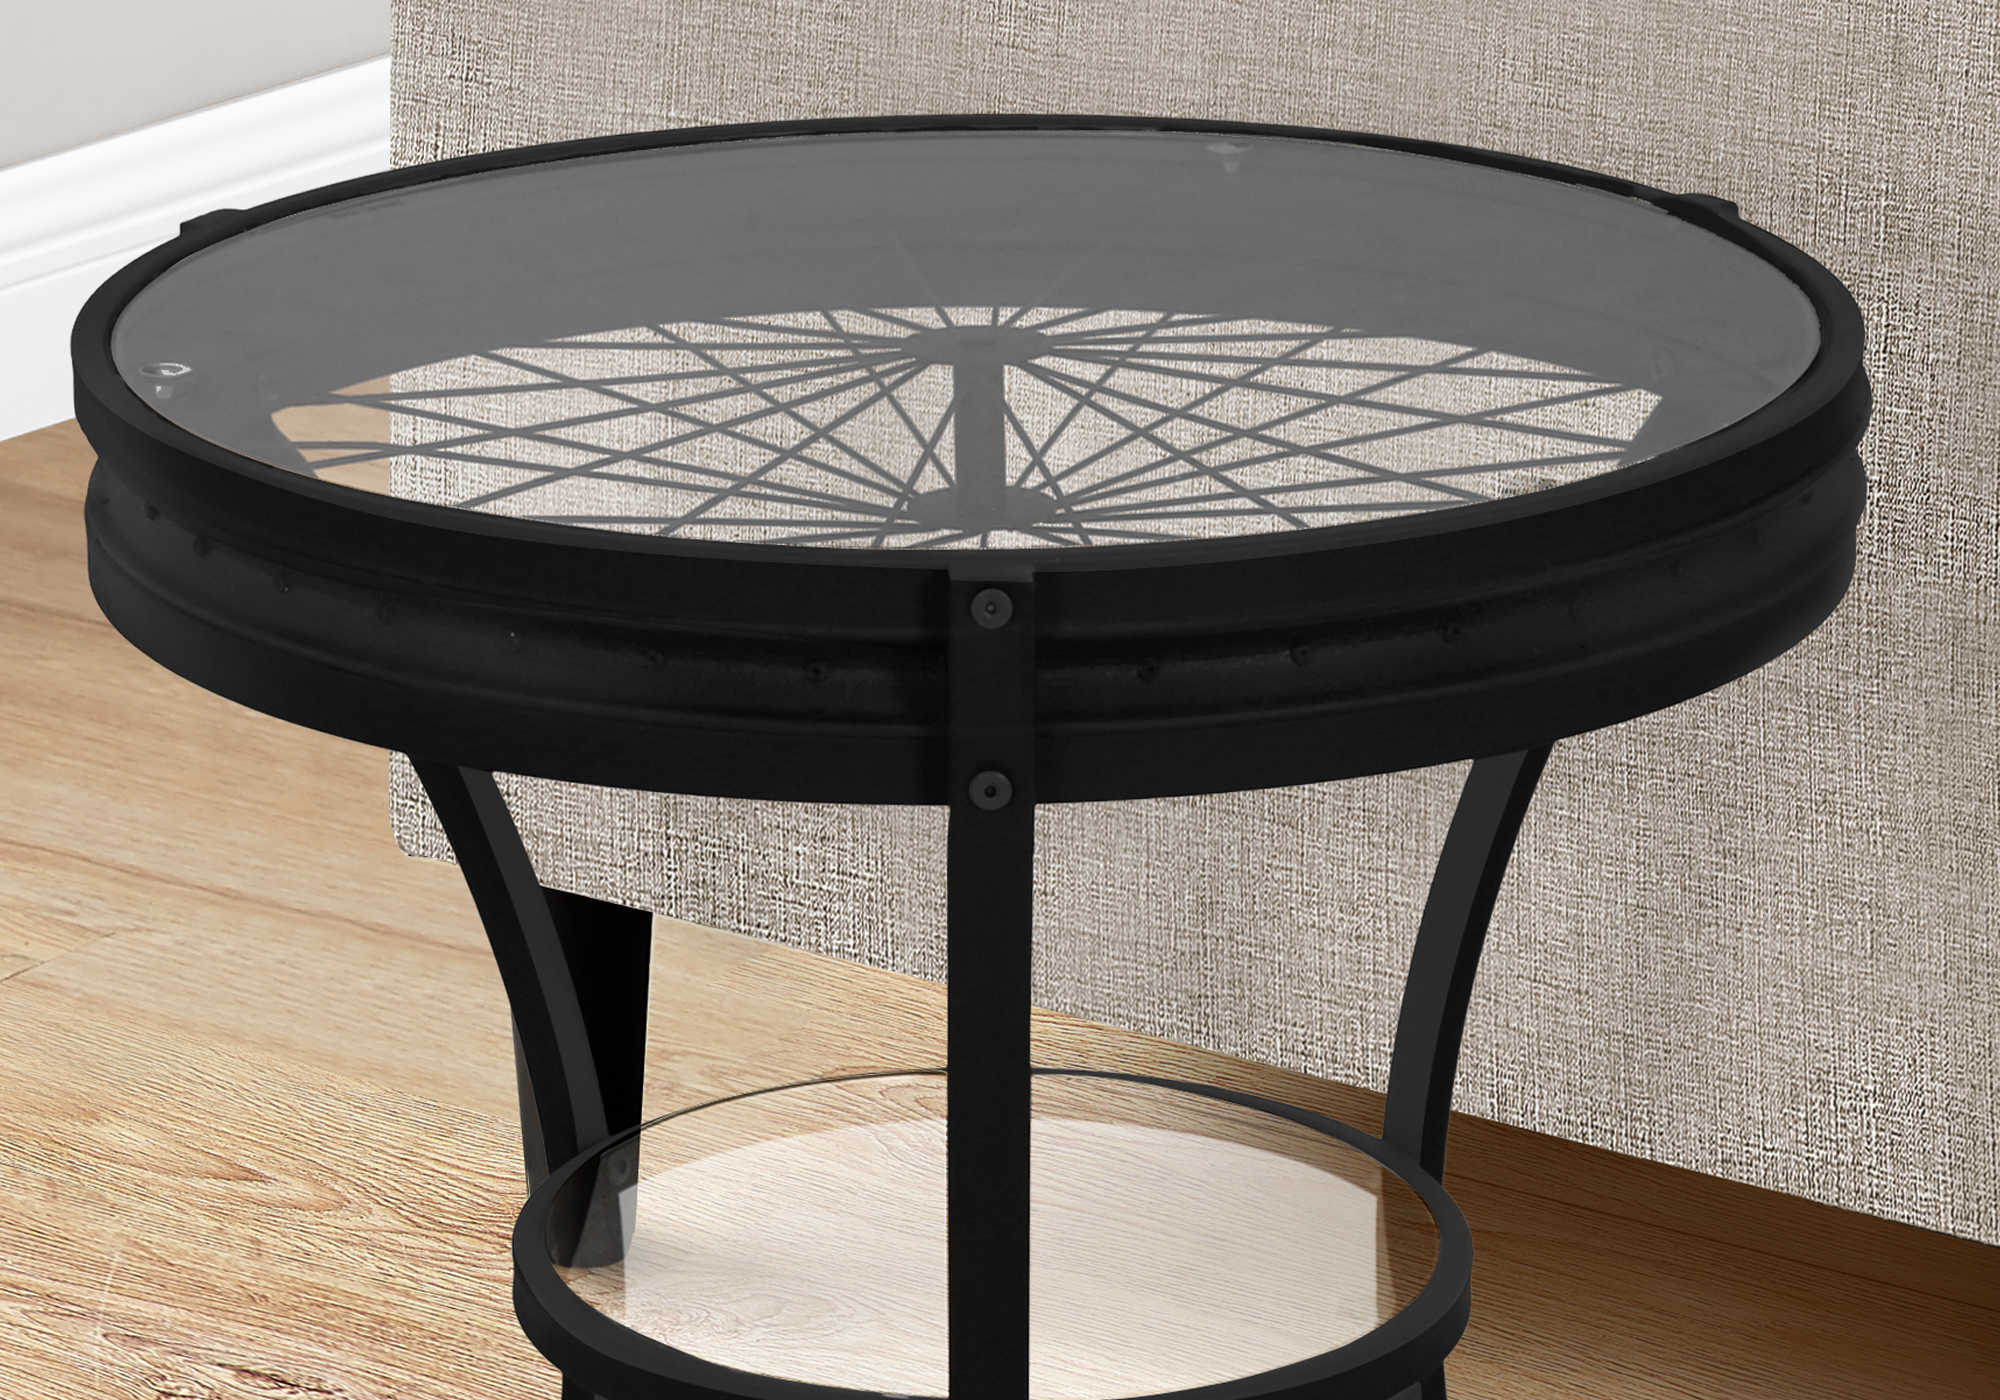 ACCENT TABLE - 22"DIA / BLACK WITH TEMPERED GLASS